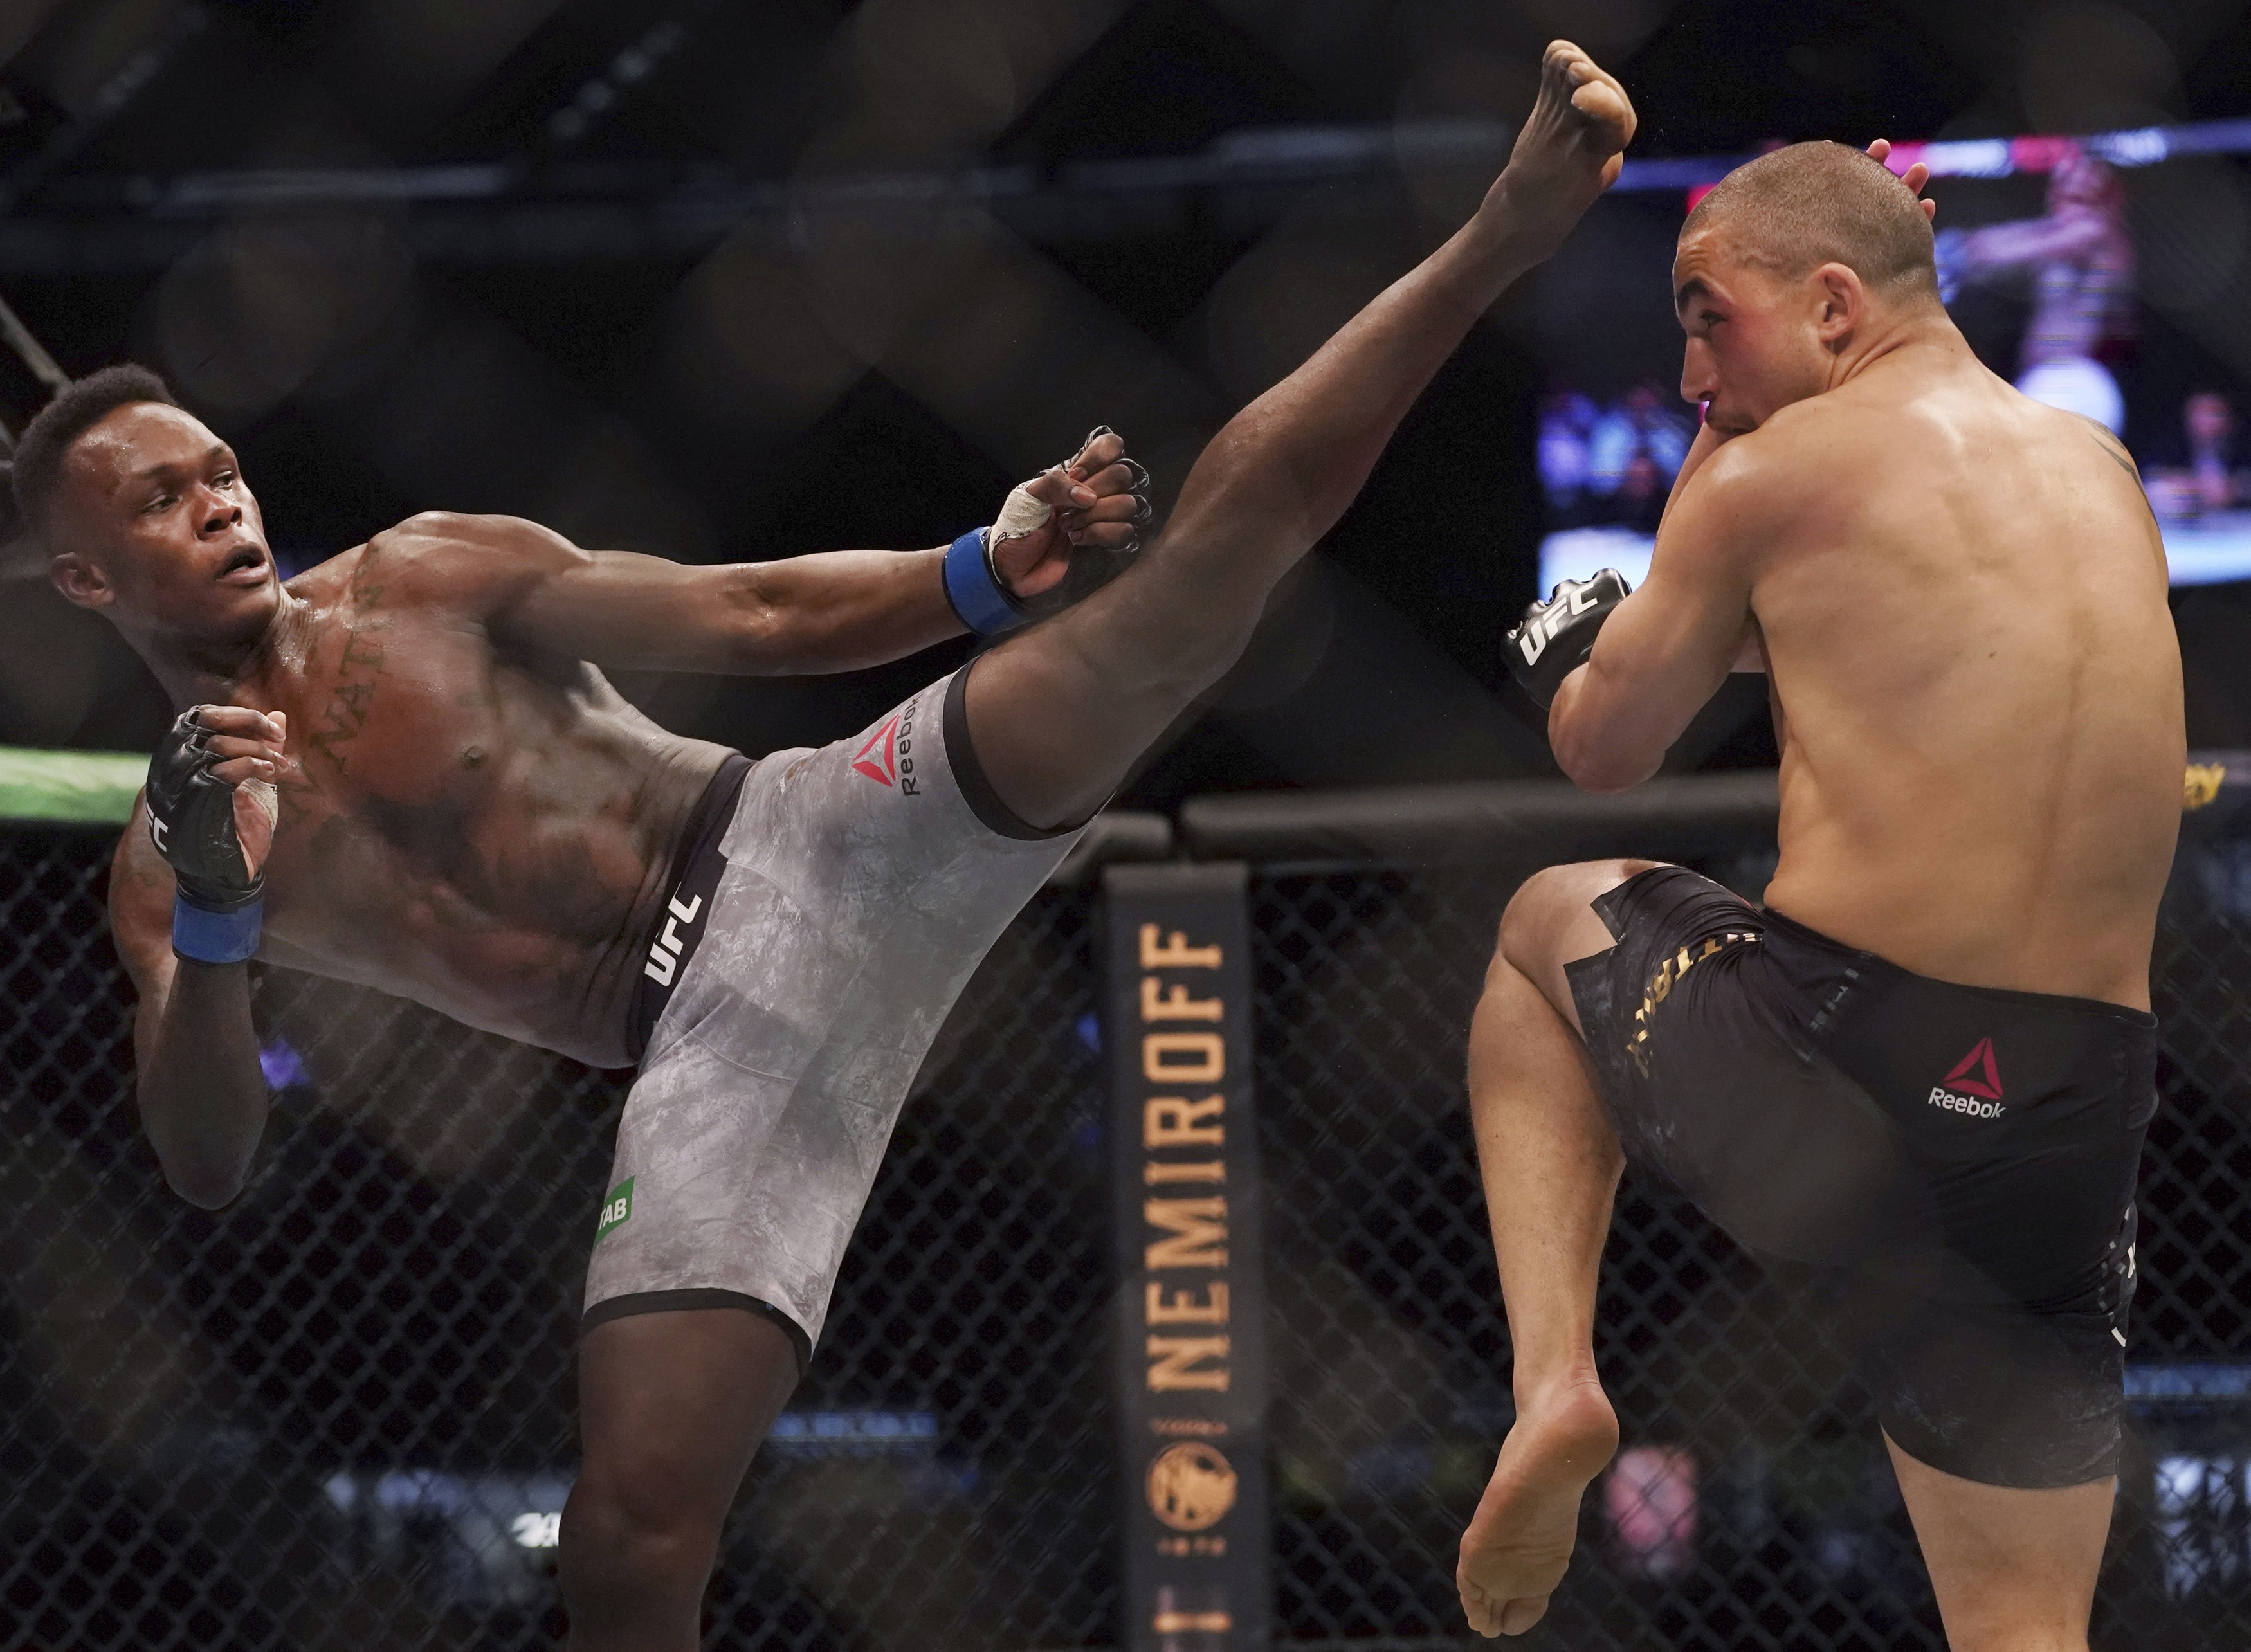 Adesanya wins the middleweight title against Robert Whittaker at UFC 243 in Melbourne, Australia in 2019. Photo: AP